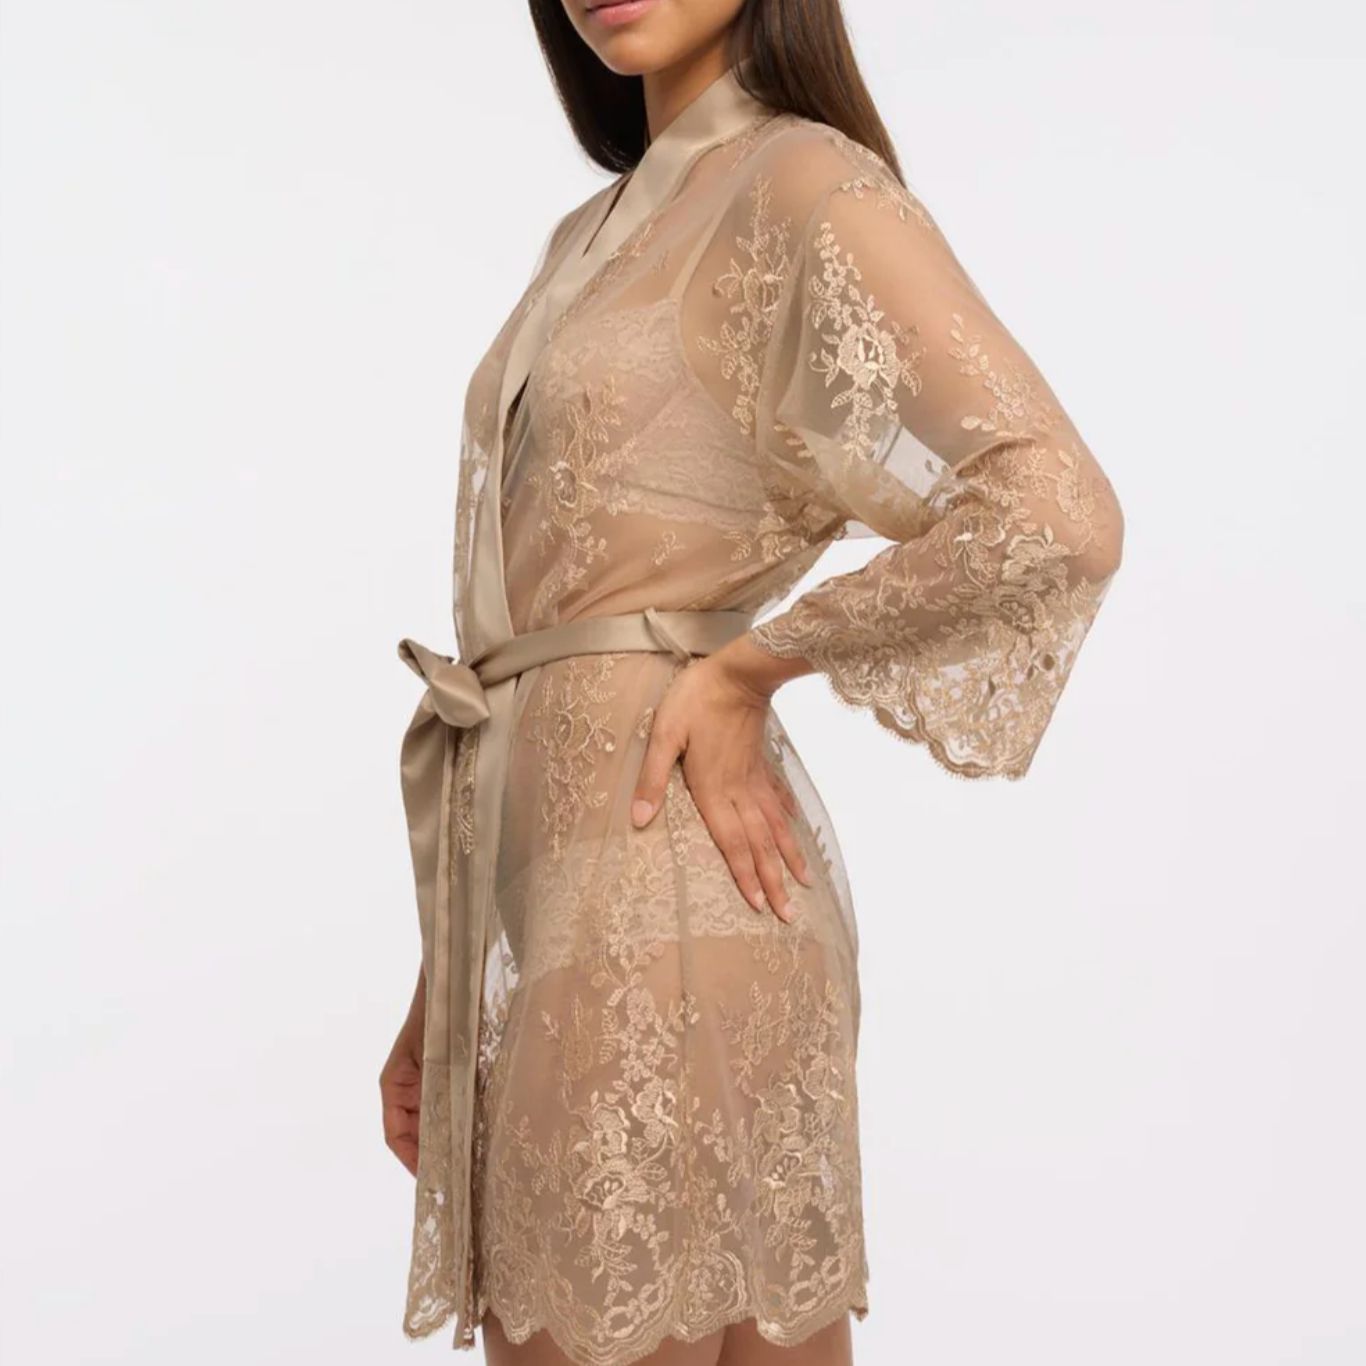 Rya Collection Darling Short Cover Up in Latte 197-Robes-Rya Collection-Latte-XSmall/Small-Anna Bella Fine Lingerie, Reveal Your Most Gorgeous Self!